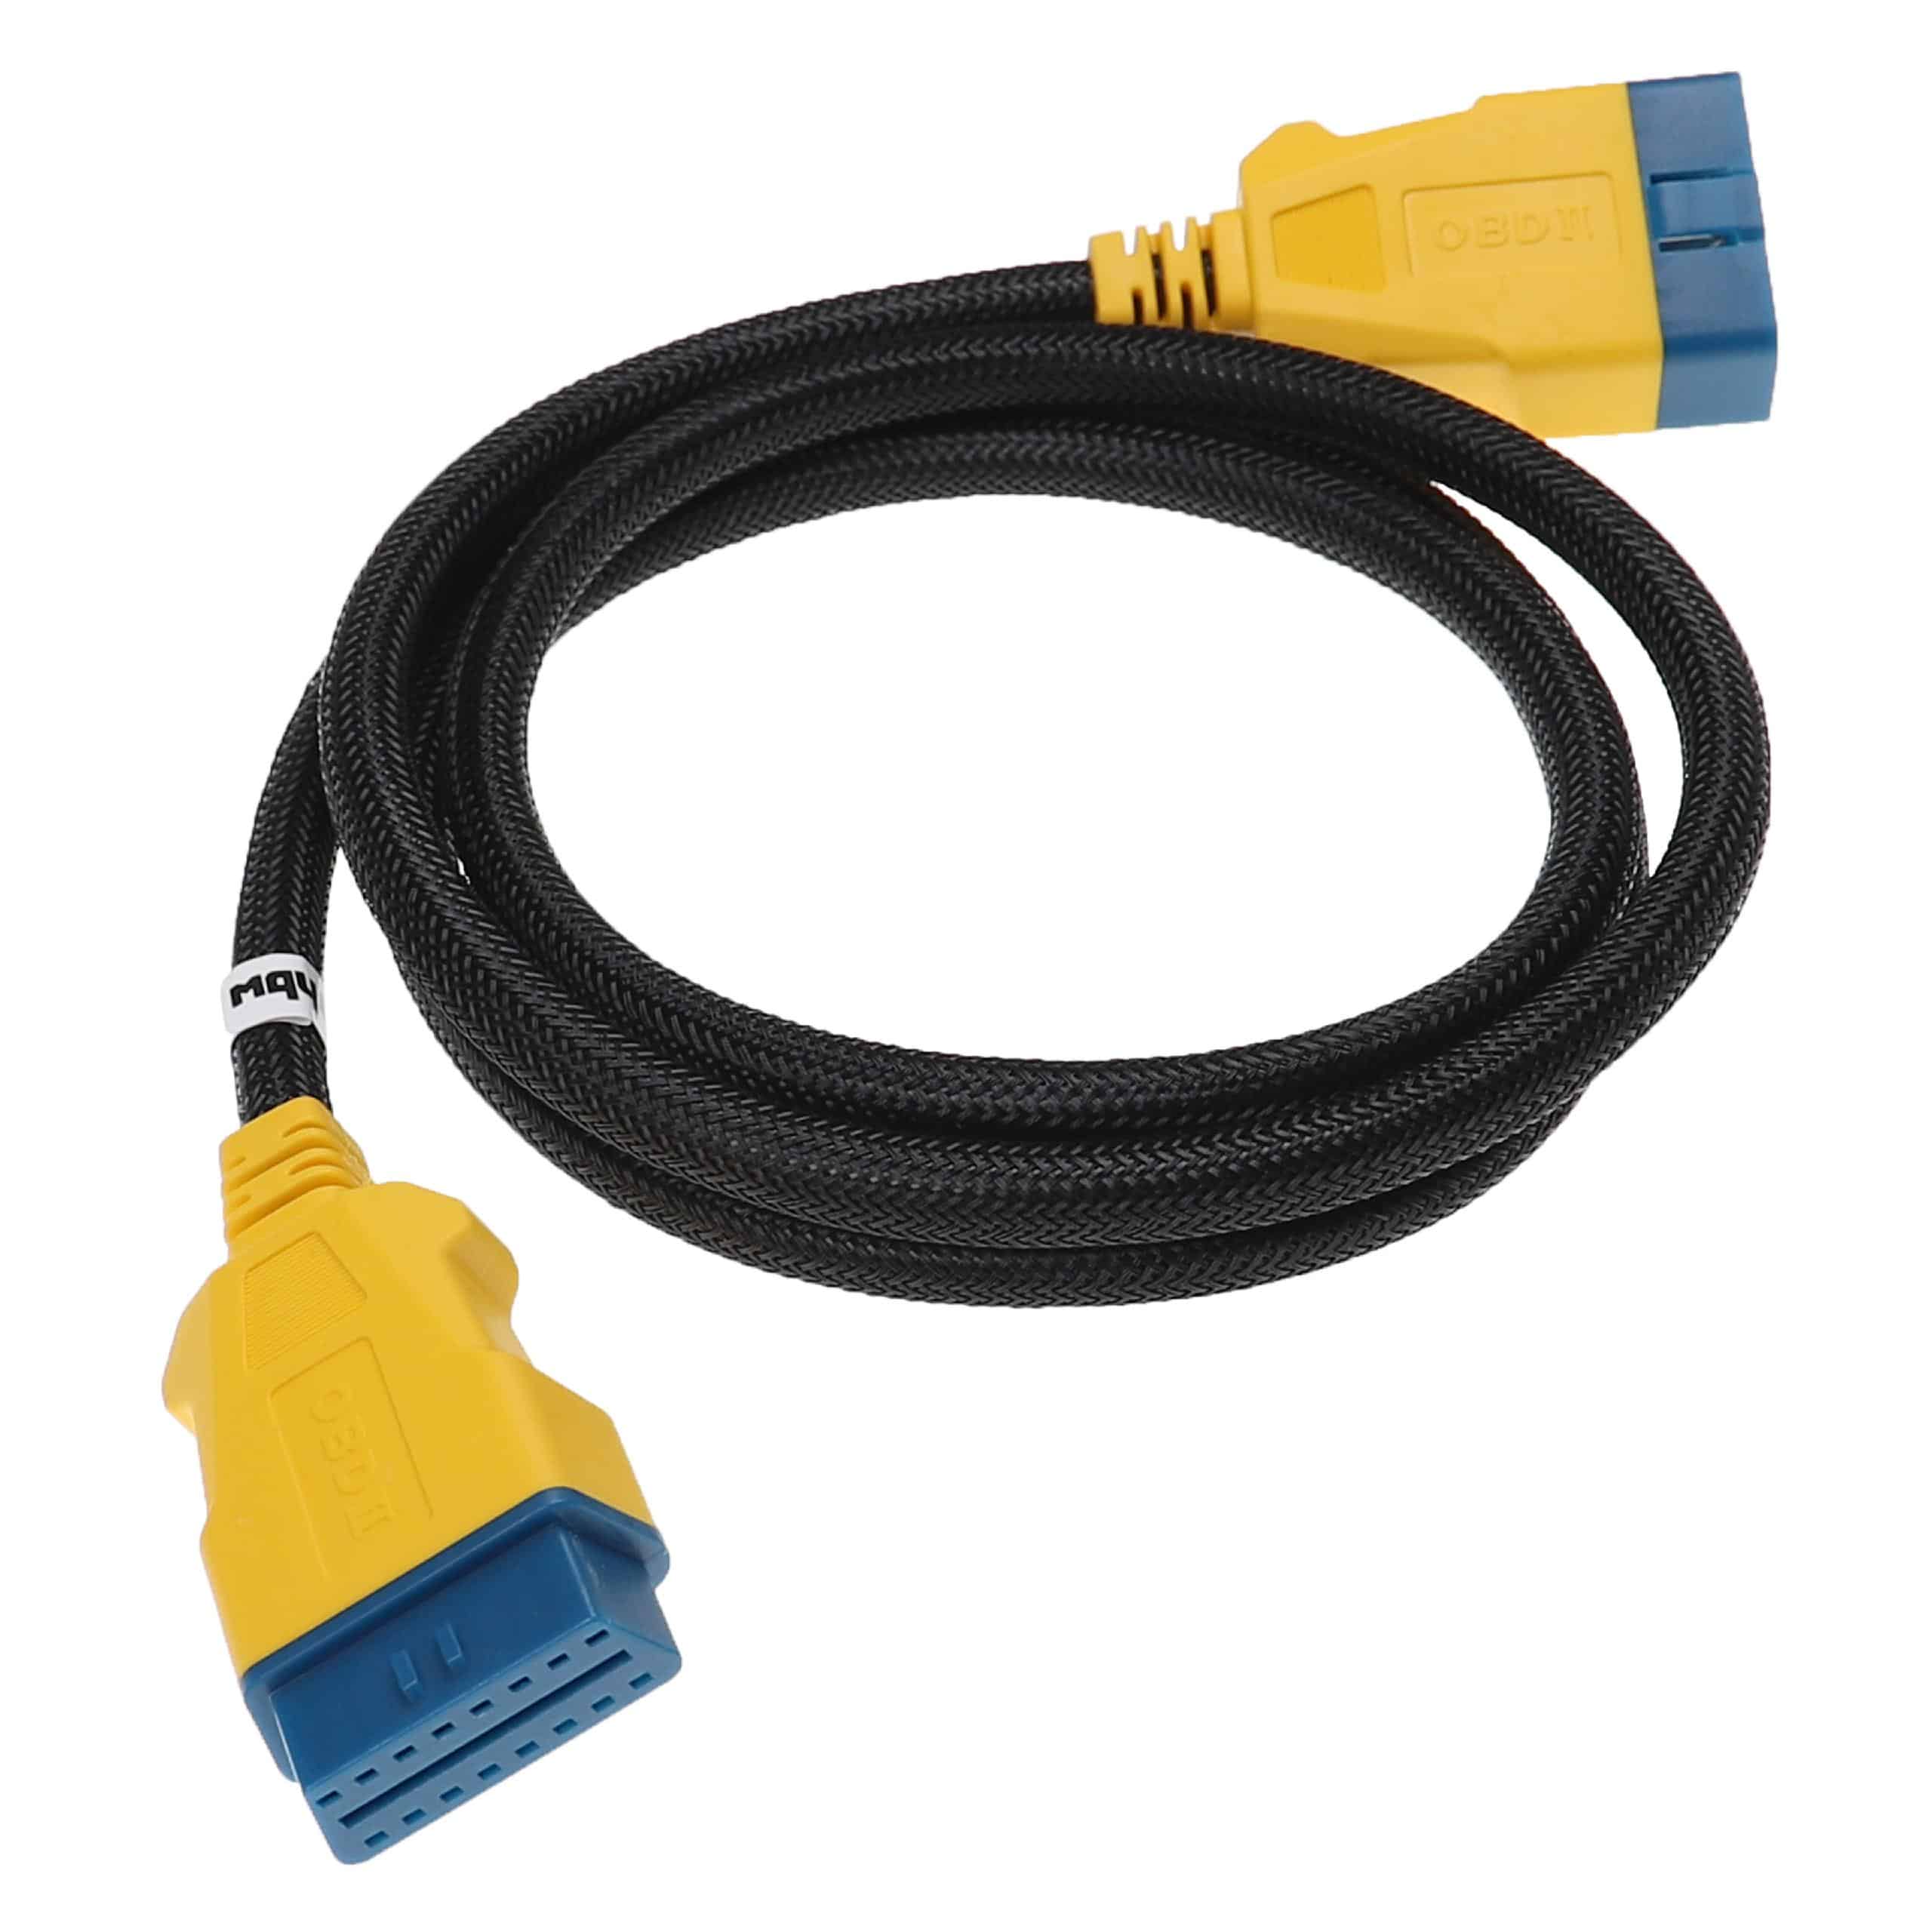 vhbw OBD2 Extension Cable 16 Pin (f) to 16 Pin (m) for LKW, Car, Vehicle - 150 cm